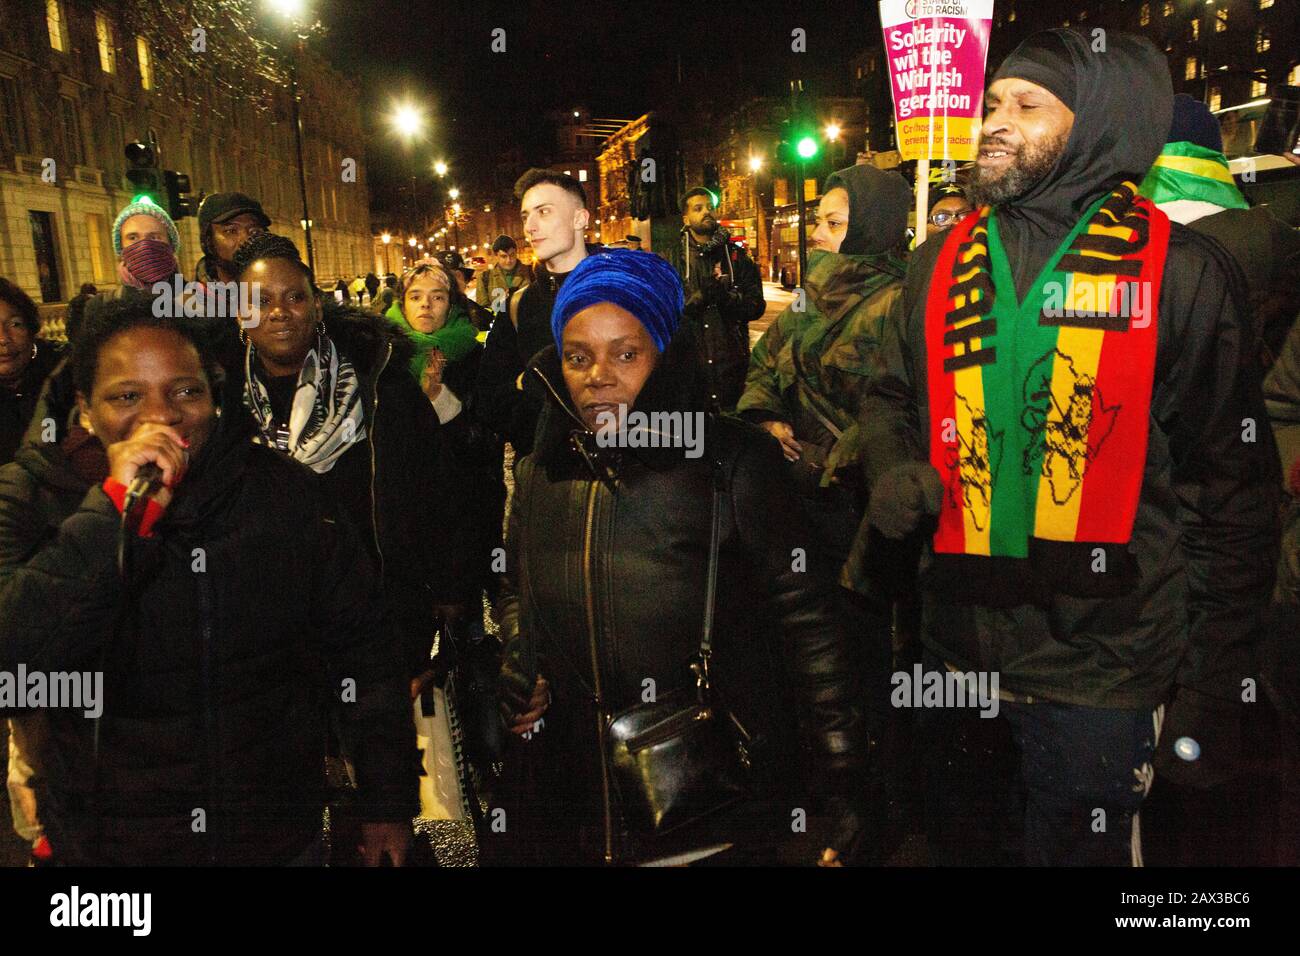 London, UK. 10th Feb 2020. People protest out side Downing Street to try to halt deportation of 50 people on a Home Office charter flight to Jamaica. Credit: Thabo Jaiyesimi/Alamy Live News Stock Photo